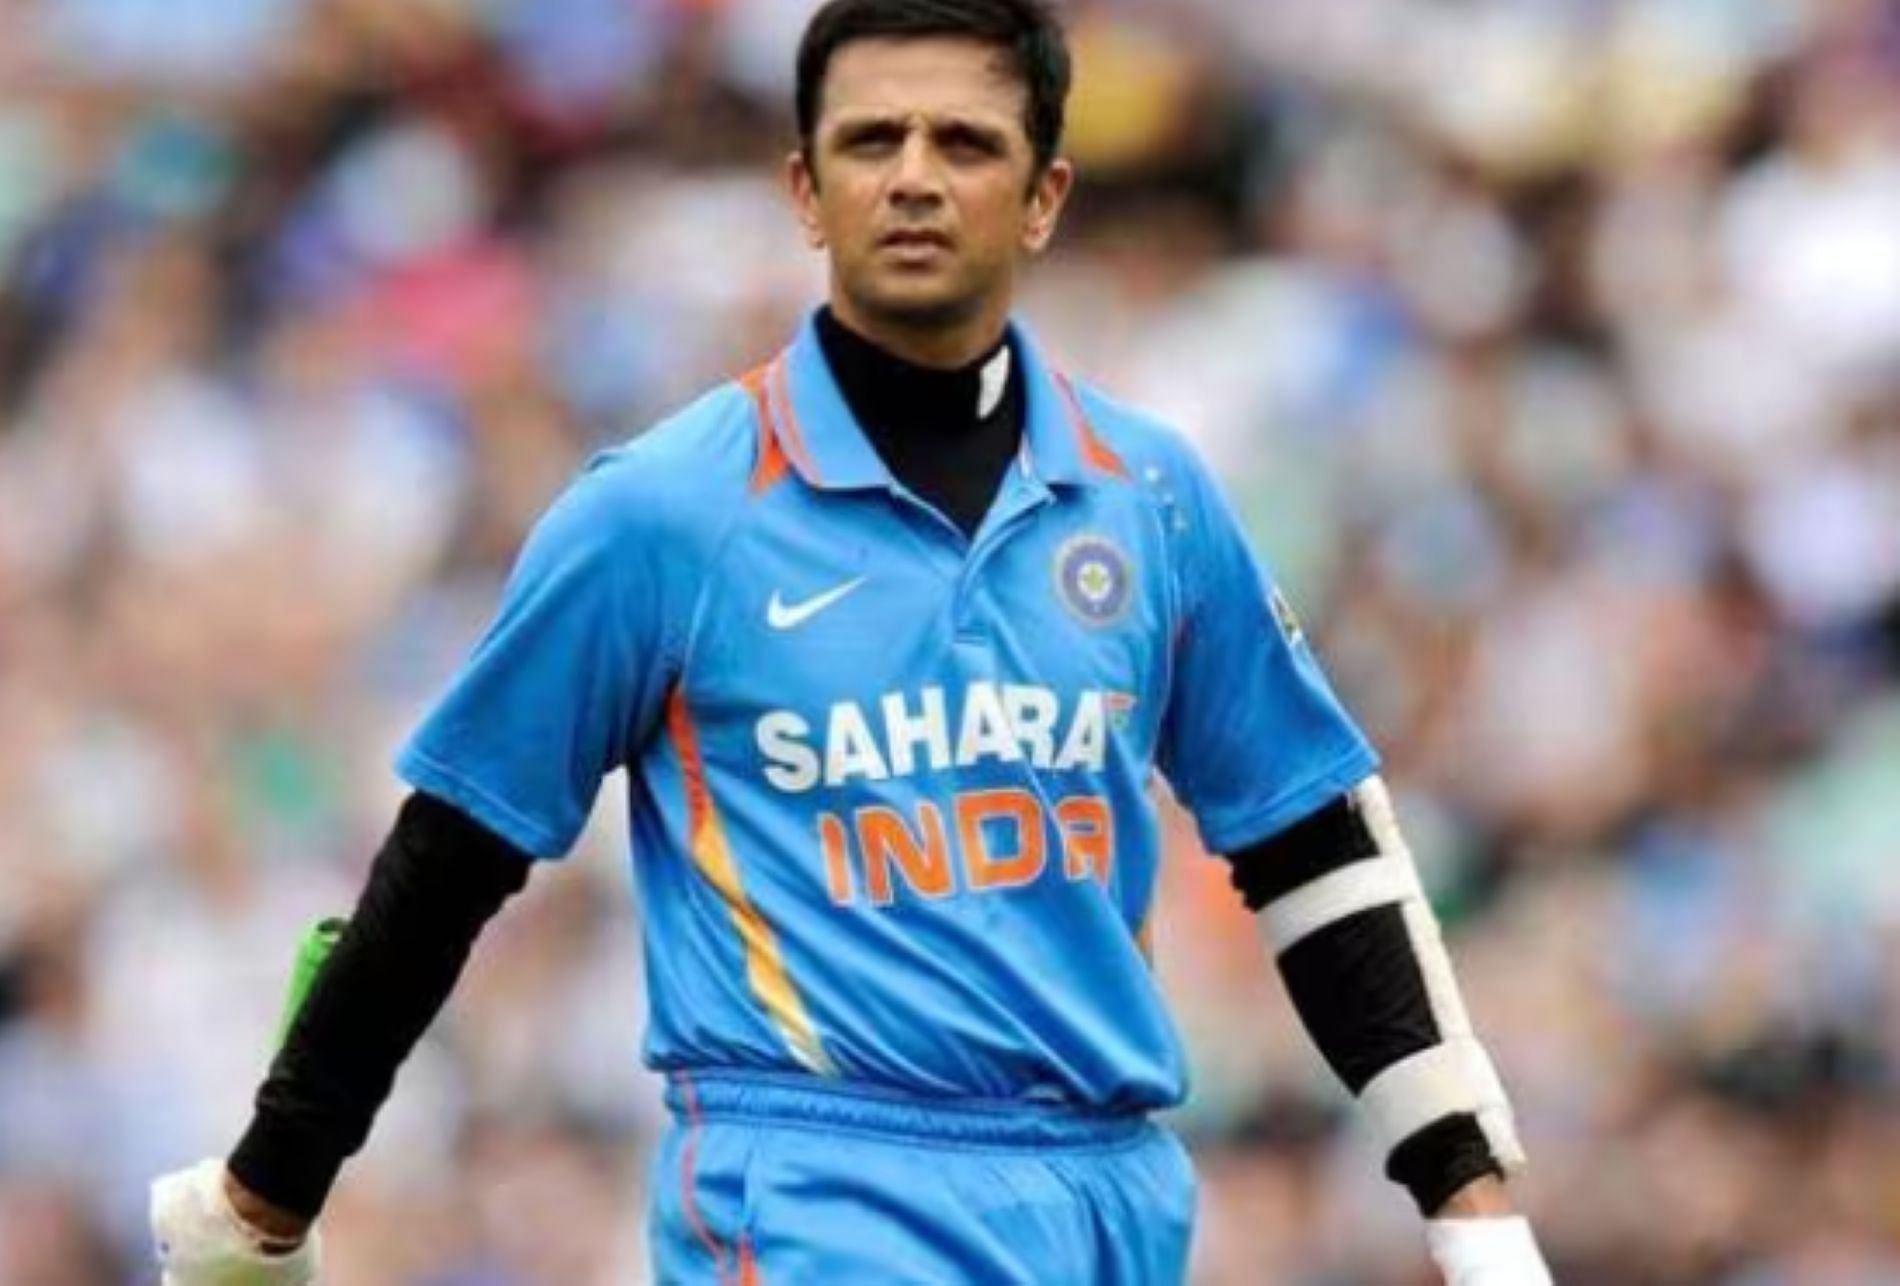 Rahul Dravid was among the most accomplished batters of the 2000s.